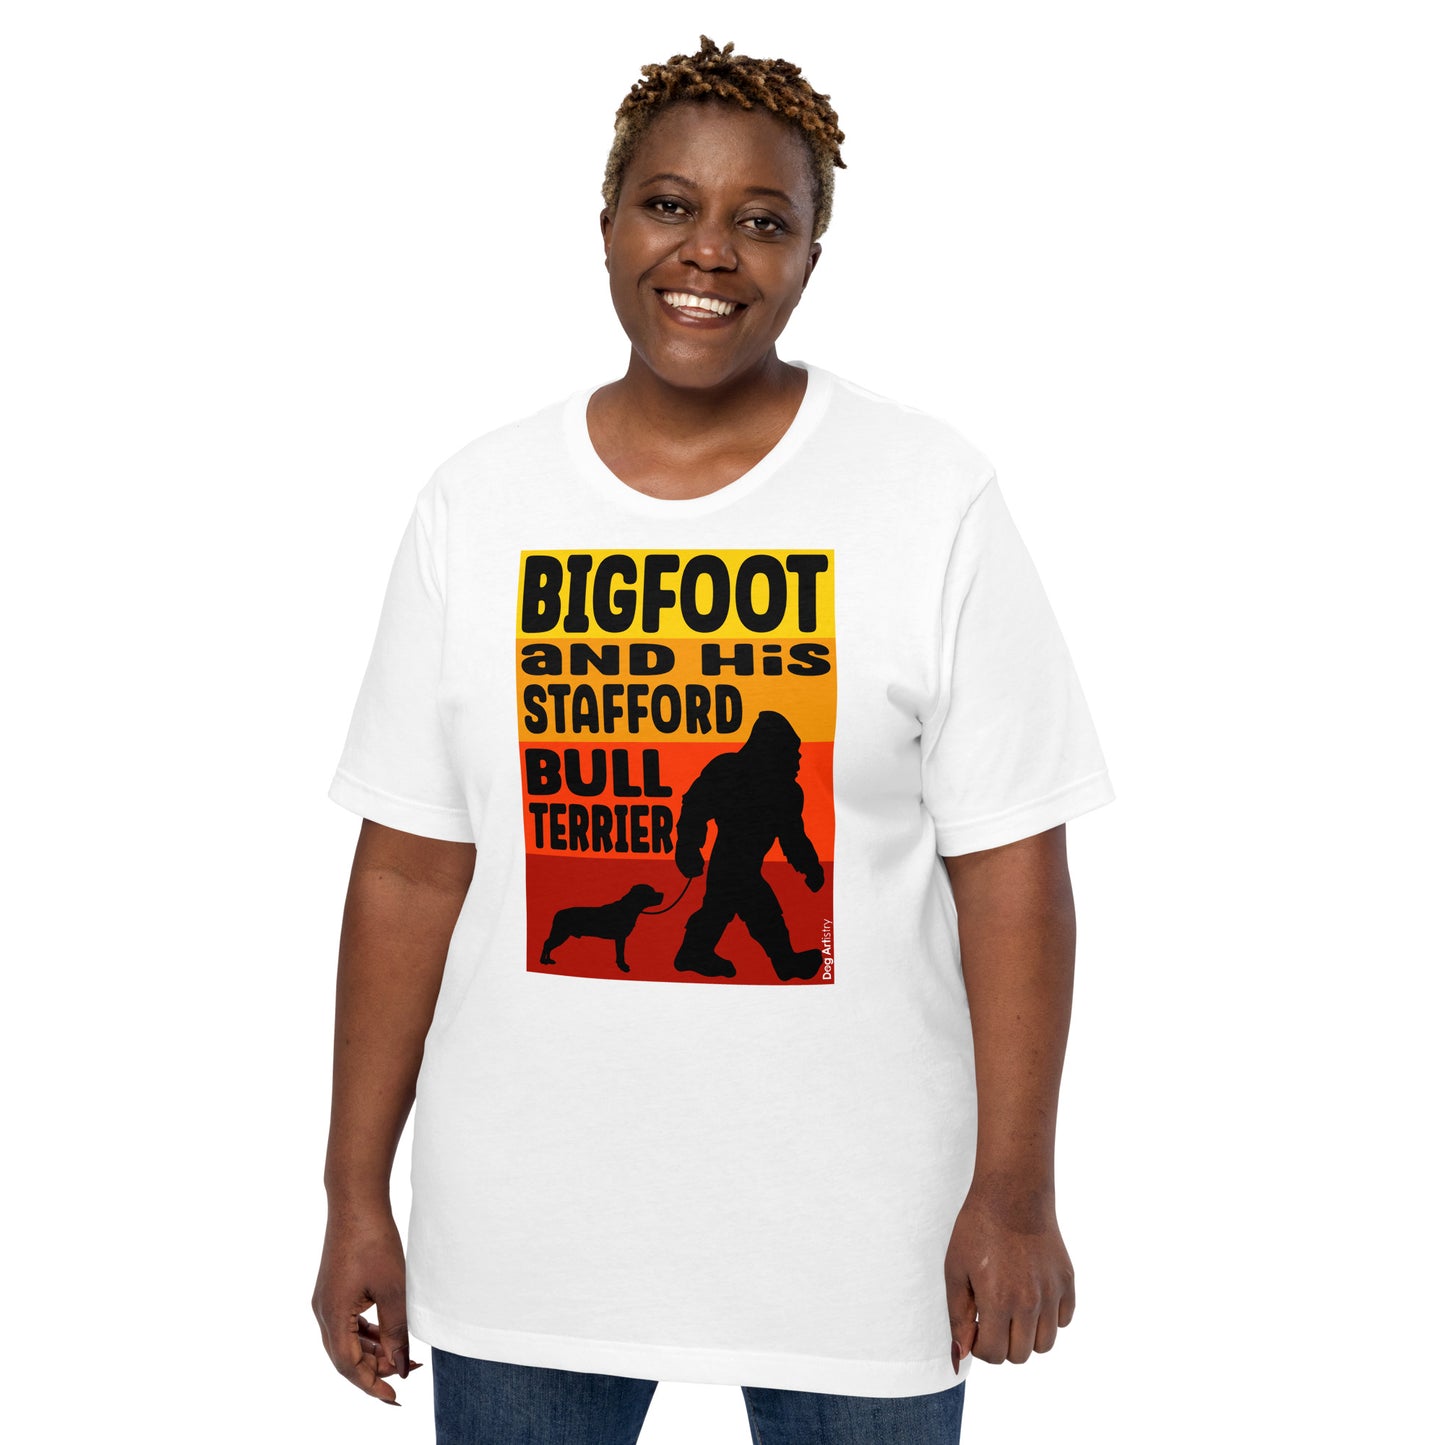 Bigfoot and his Staffordshire Bull Terrier unisex white t-shirt by Dog Artistry.